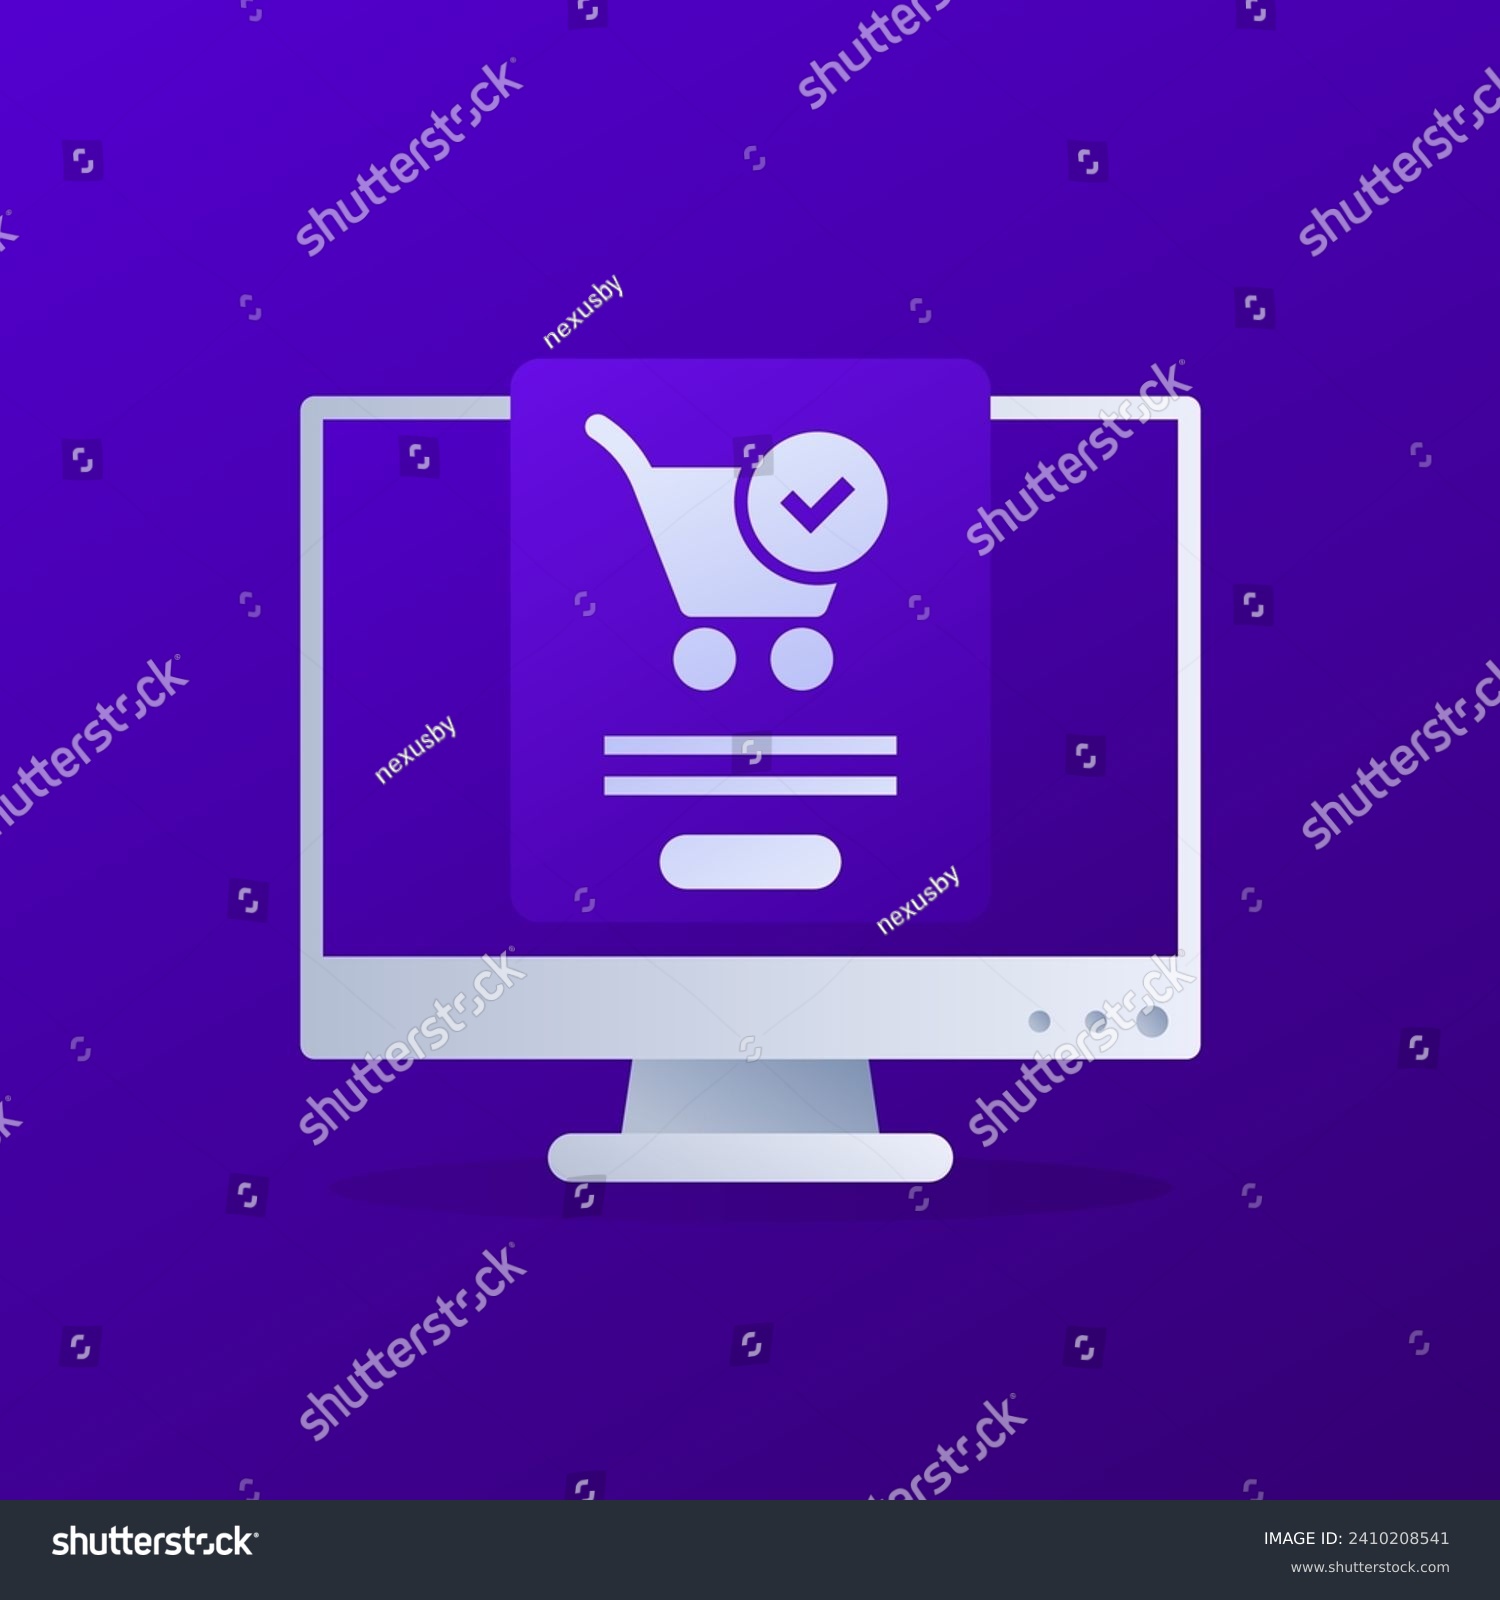 SVG of completed order vector design with shopping cart icon svg